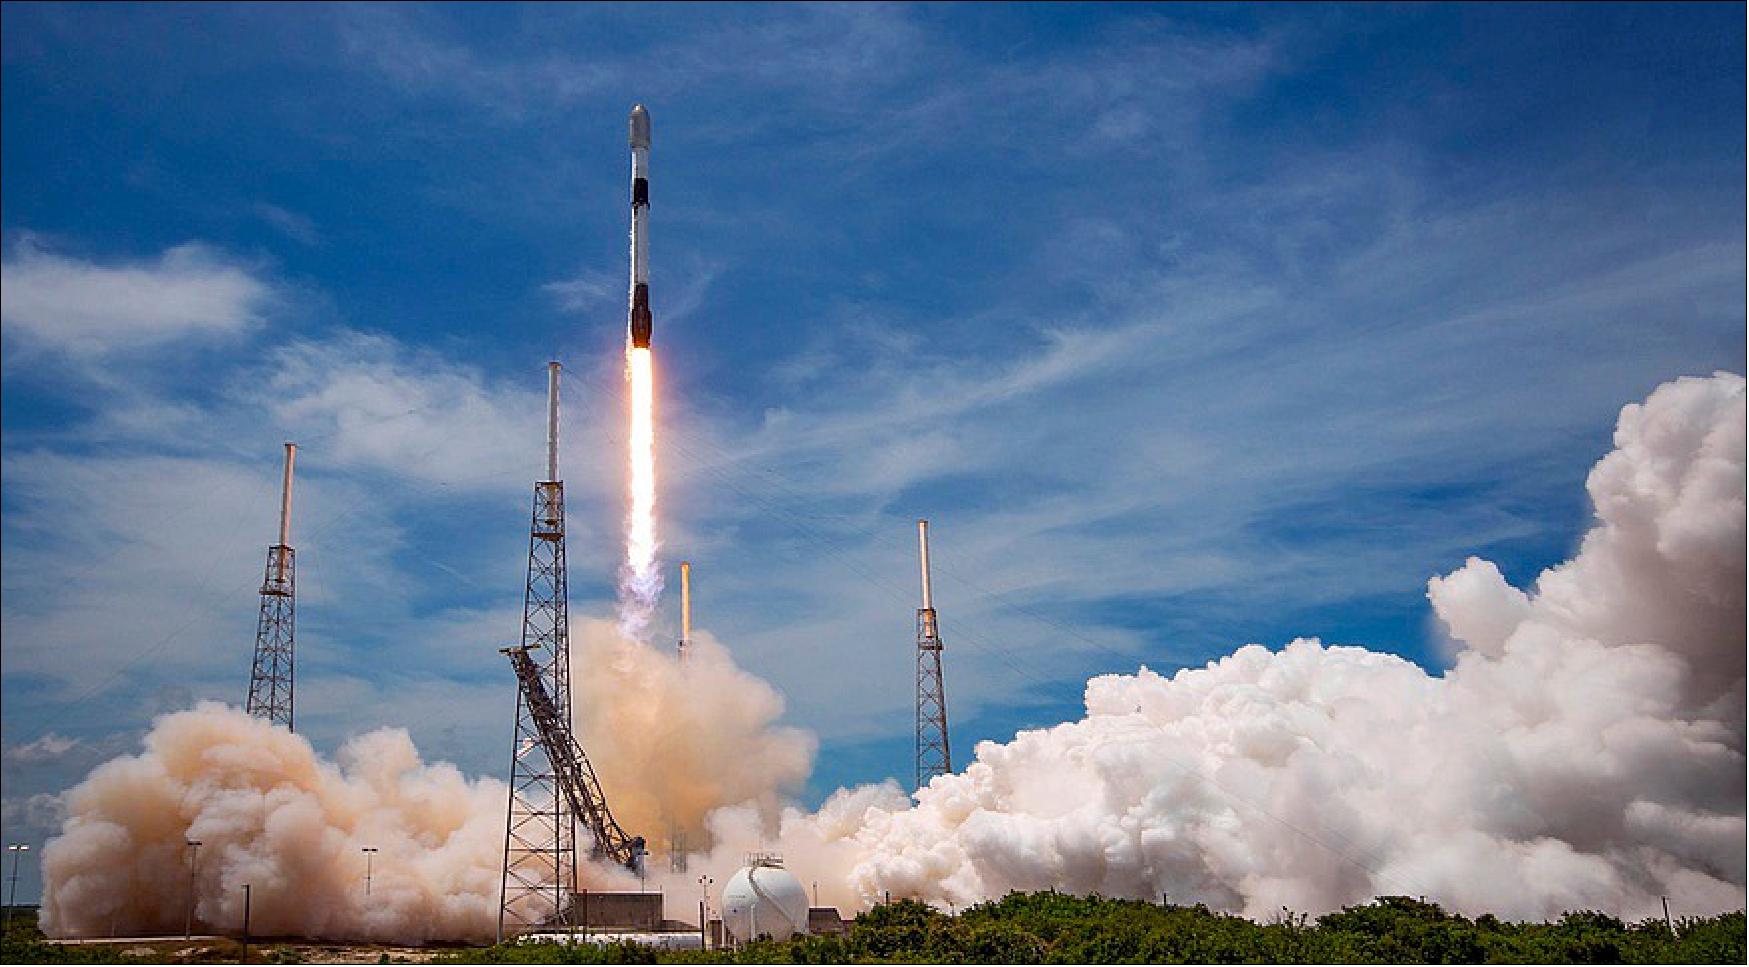 Figure 1: A SpaceX Falcon 9 lifts off May 25 on the Transporter-5 rideshare mission carrying 59 payloads (image credit: SpaceX)